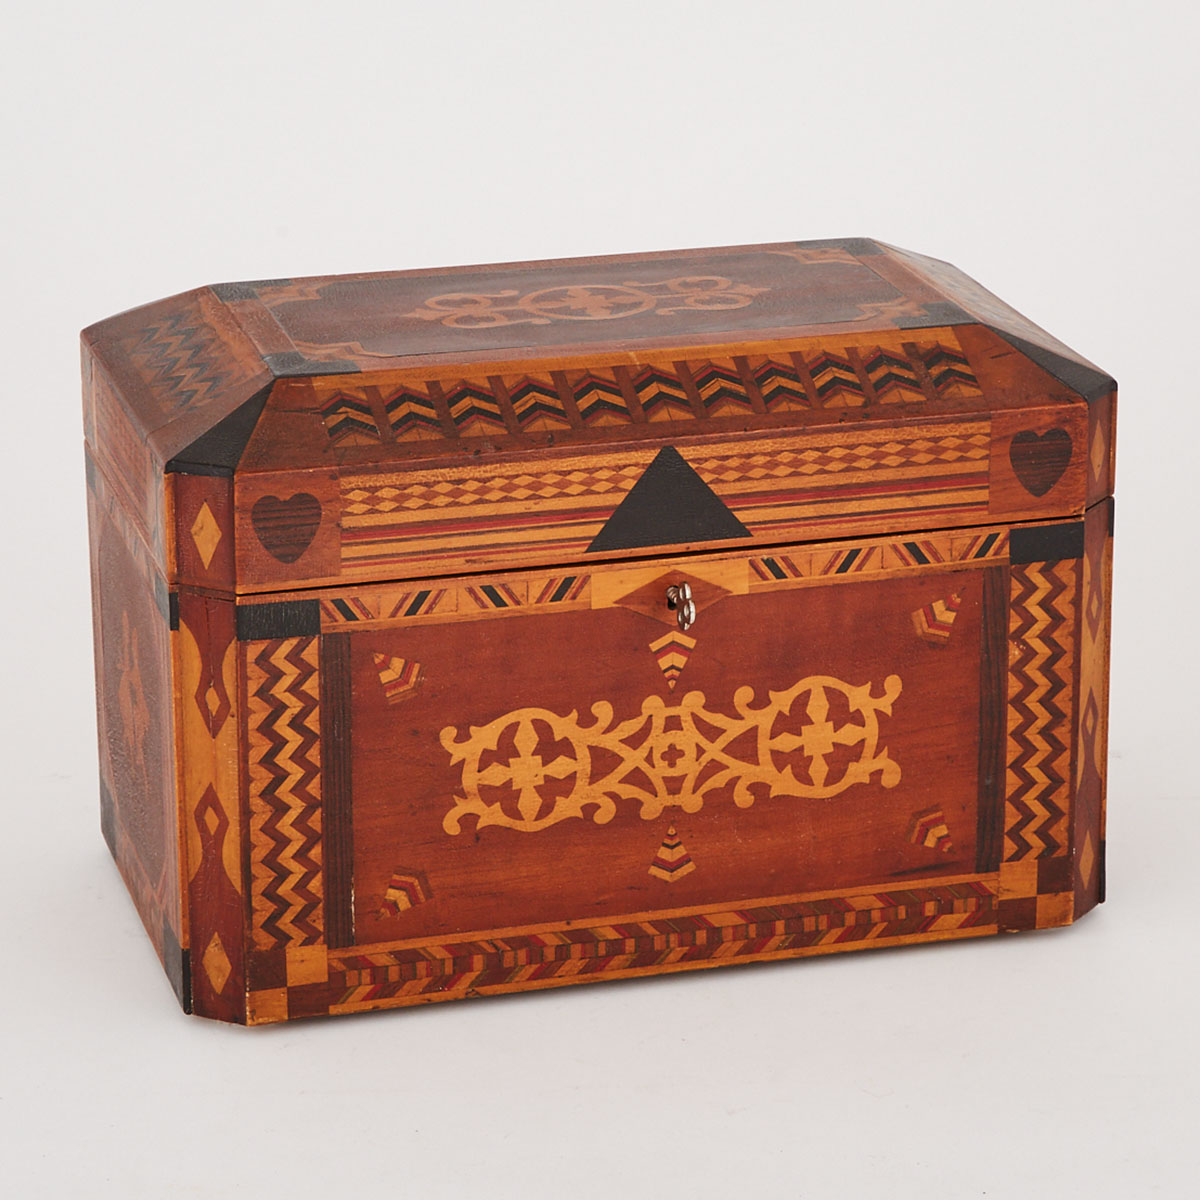 Marquetry Inlaid Jewellery Casket, early 20th century